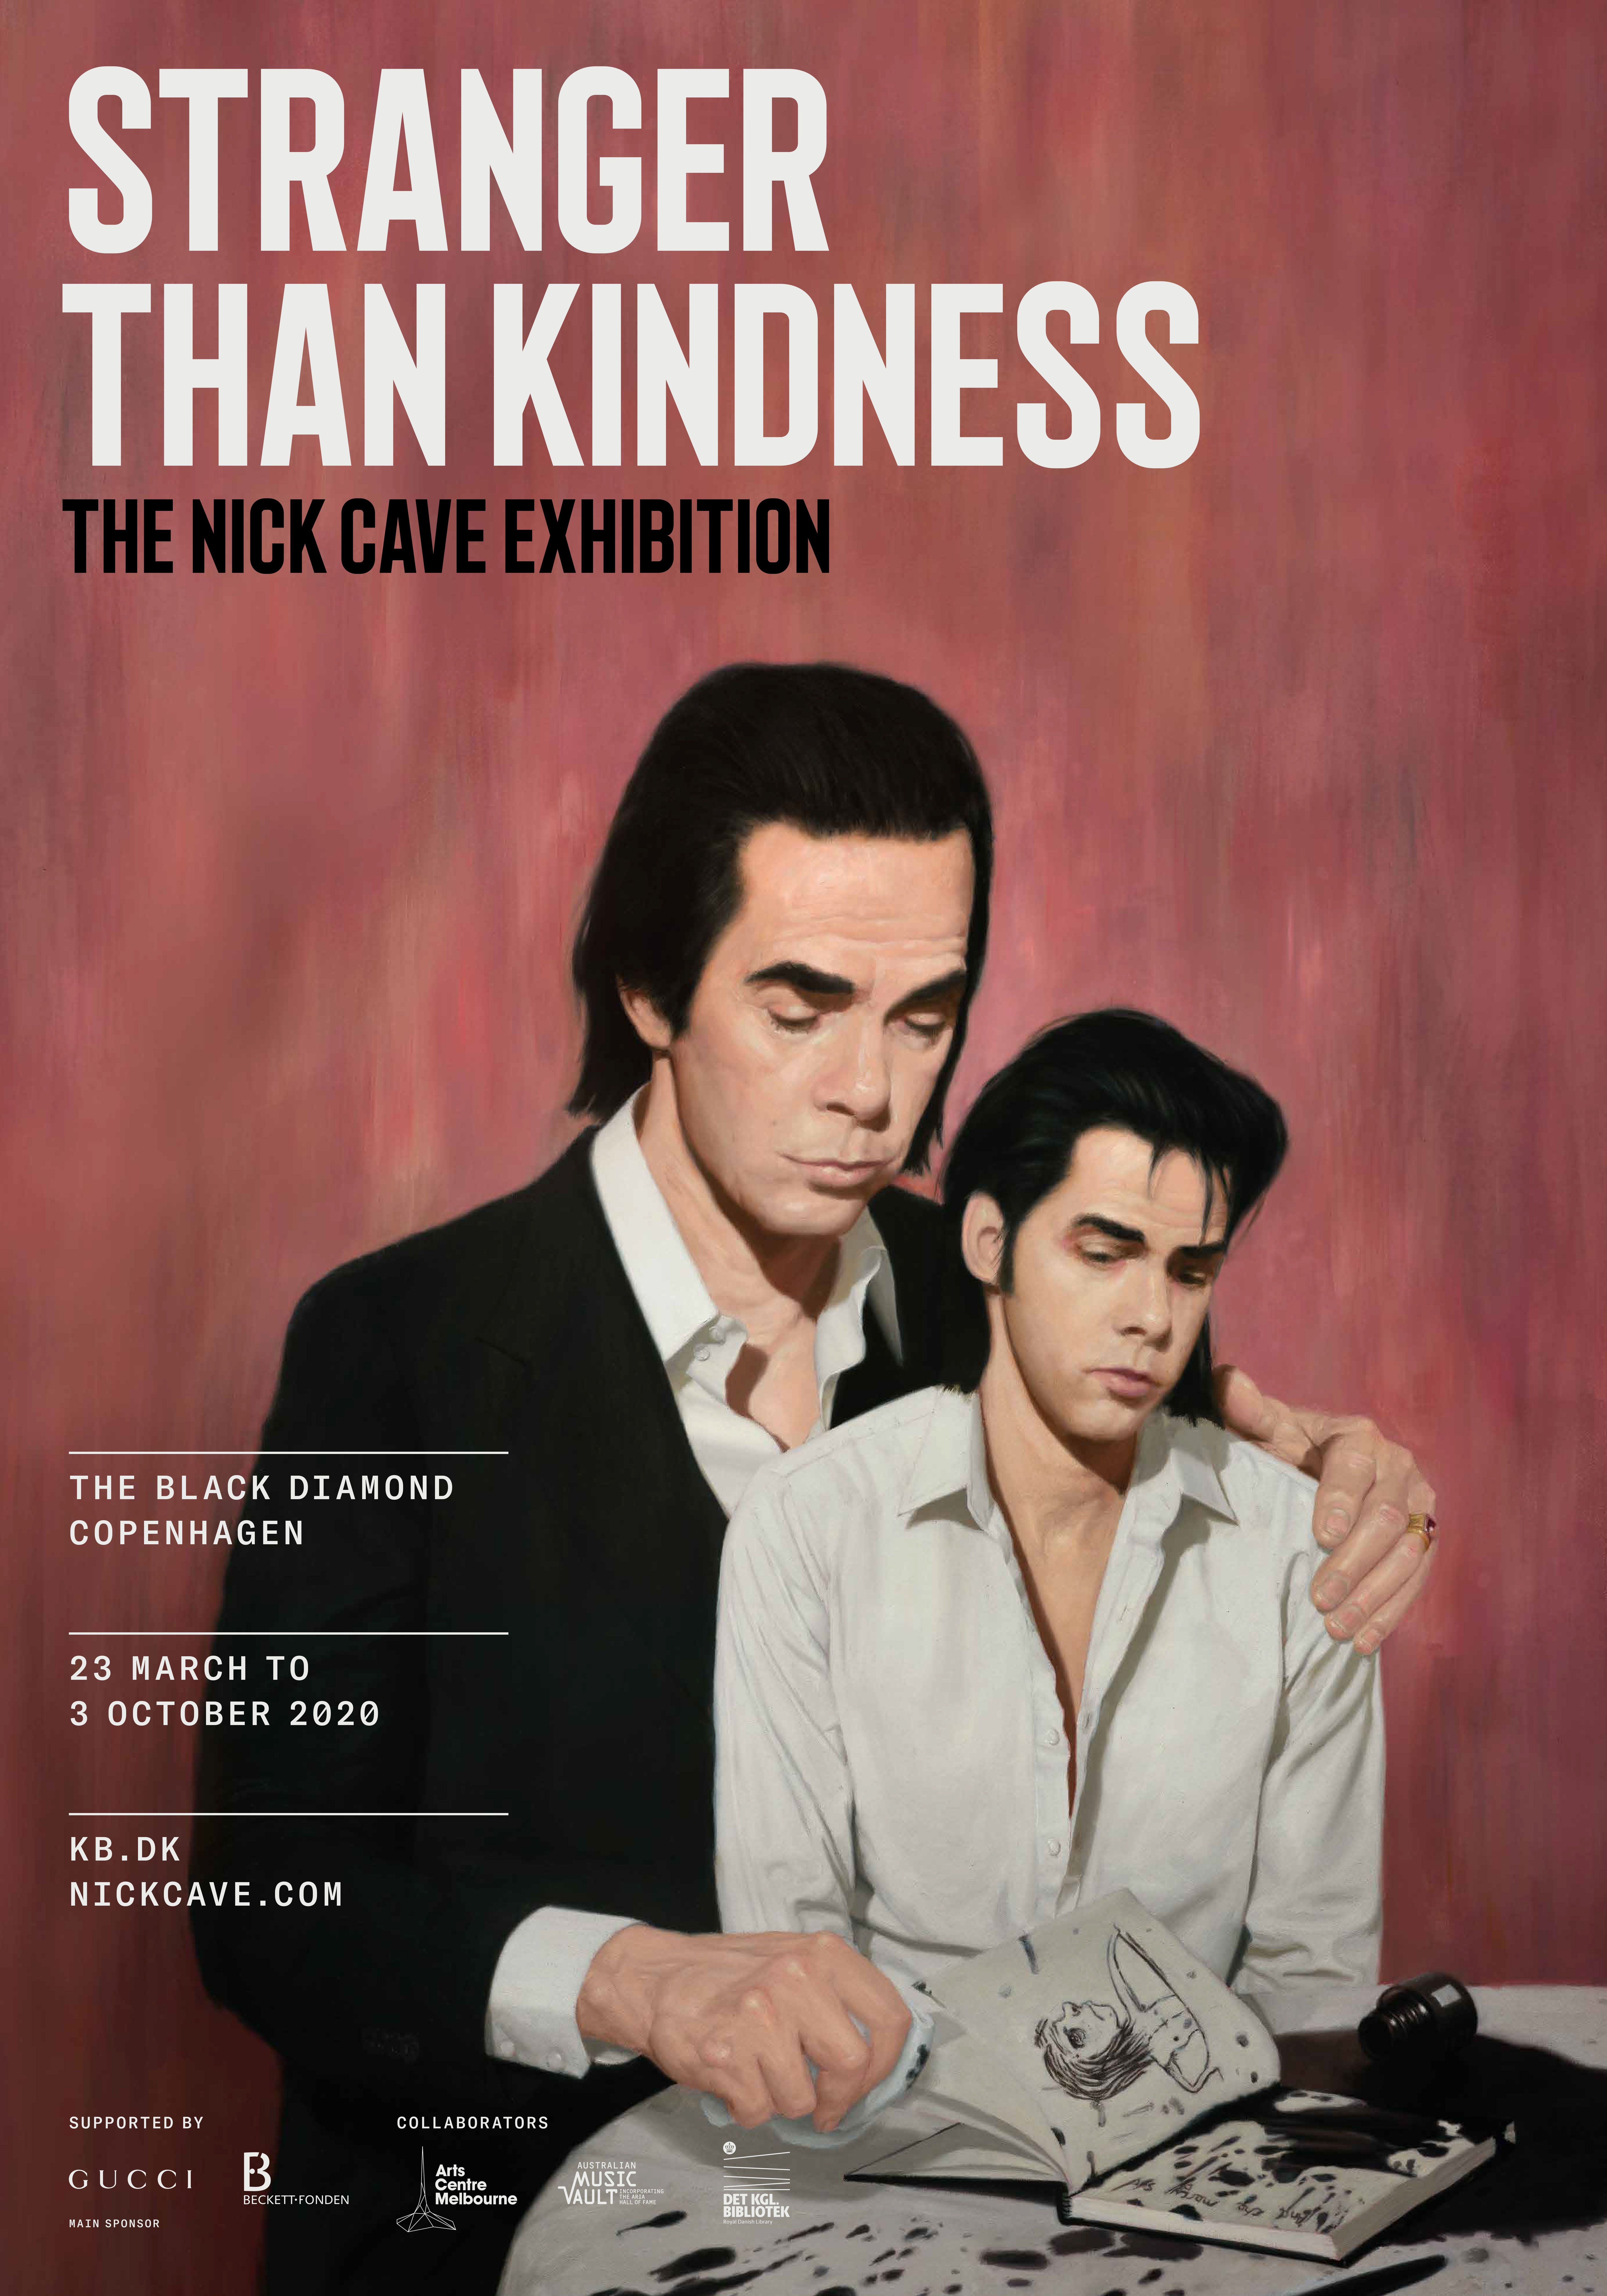 ‘Stranger Than Kindness’, the Nick Cave exhibition, will take place at the Black Diamond in Copenhagen, Denmark from March 23 to October 3, 2020. Photo: Gucci